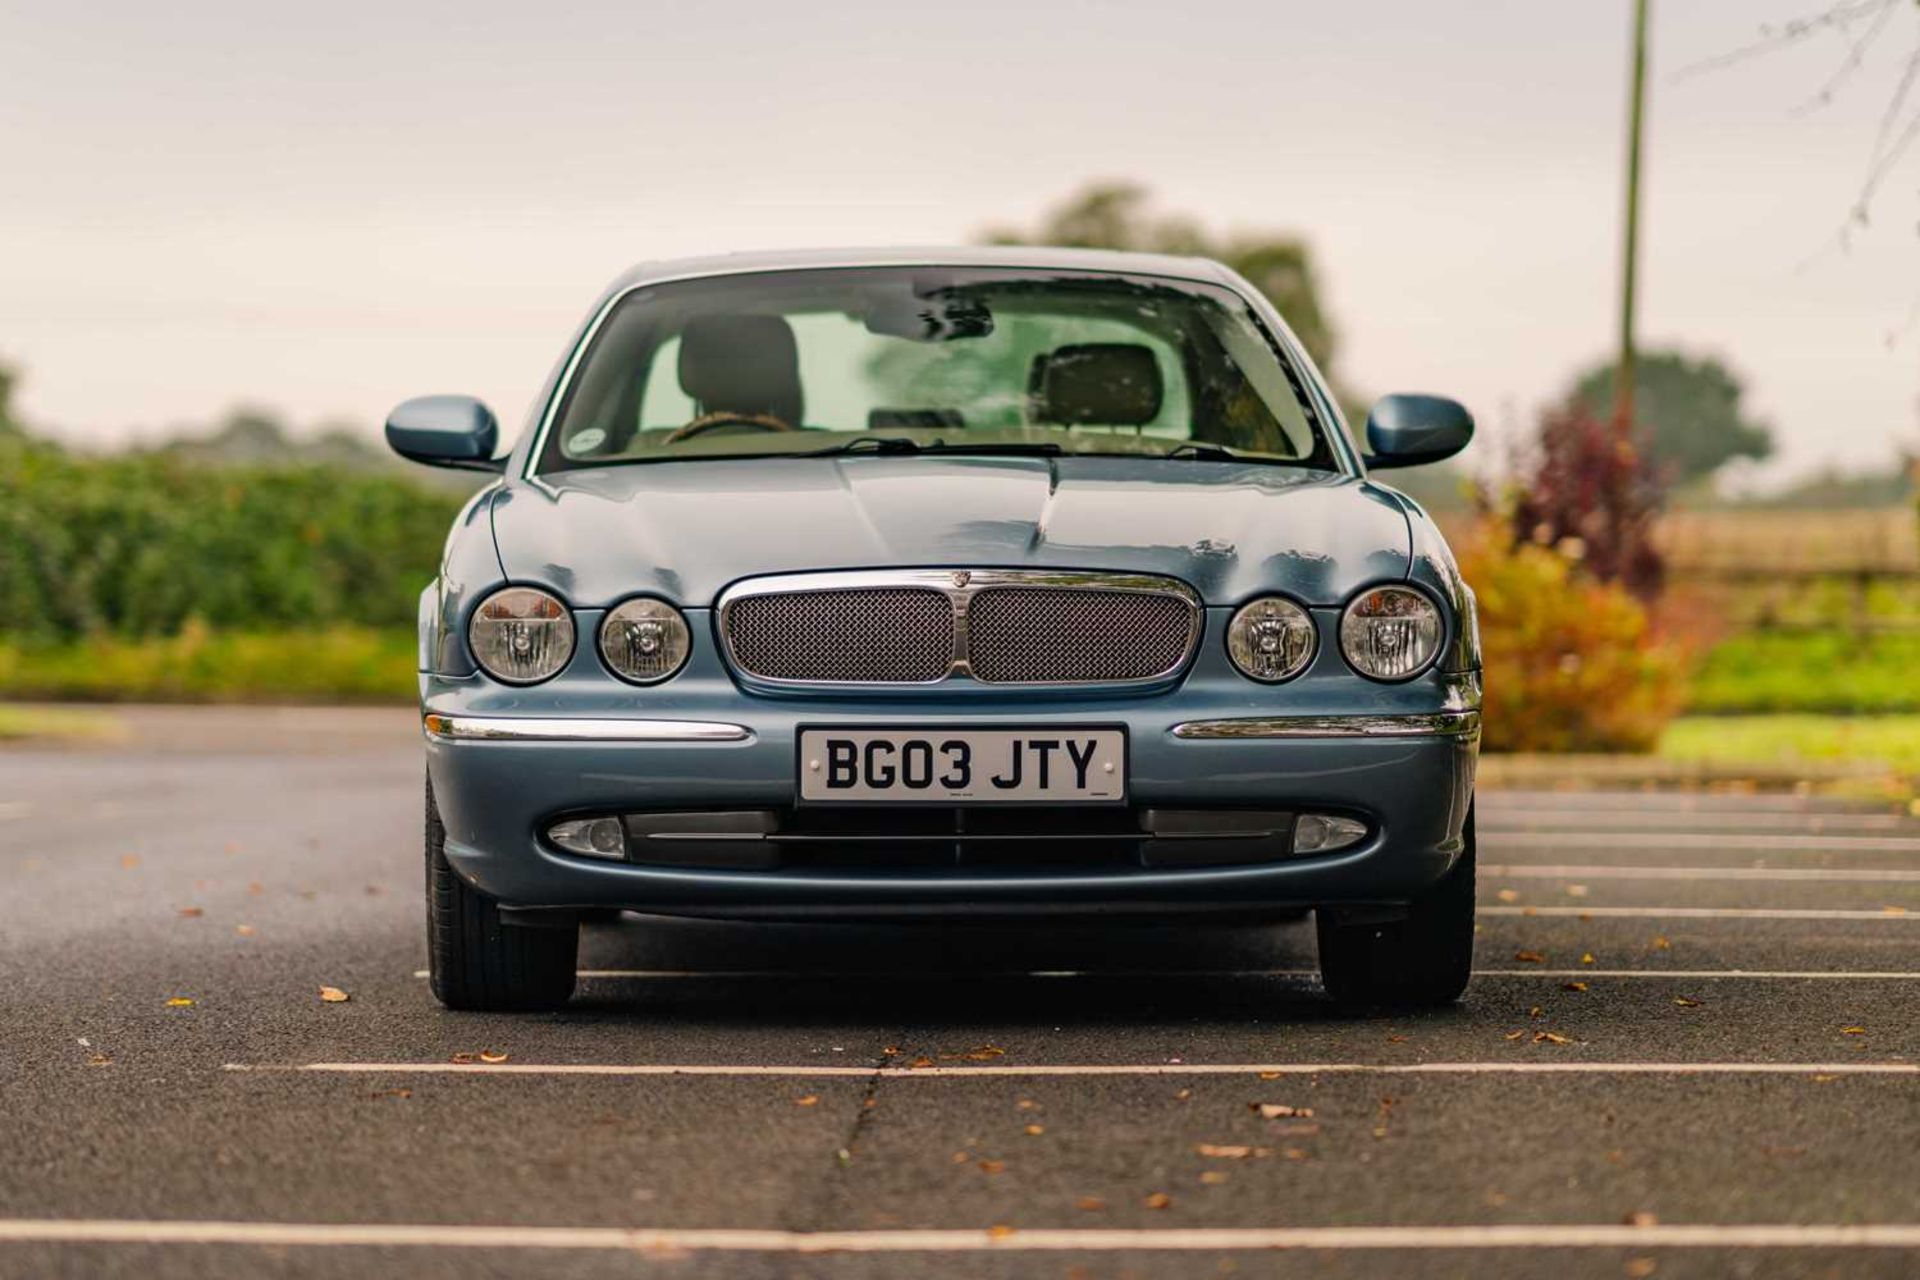 2003 Jaguar XJ8 4.2 V8 SE Range-topping 'Special Equipment' model, with a current MOT and warranted  - Image 3 of 124